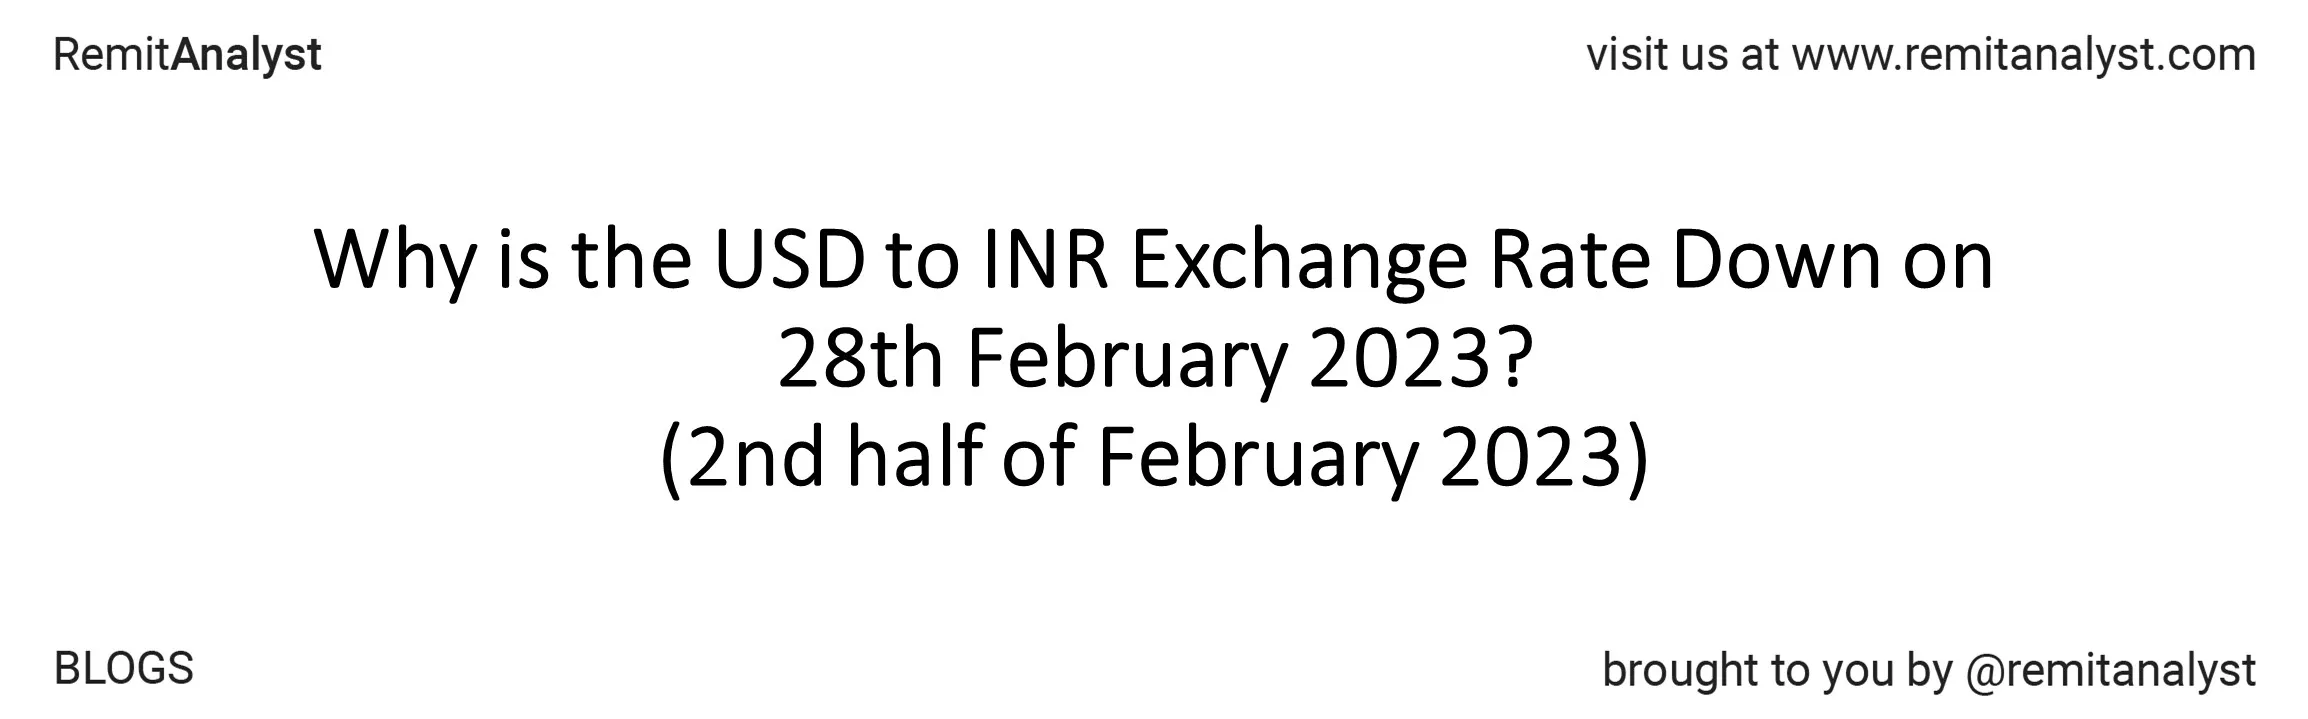 usd-to-inr-exchange-rate-16-feb-2023-to-28-feb-2023-title